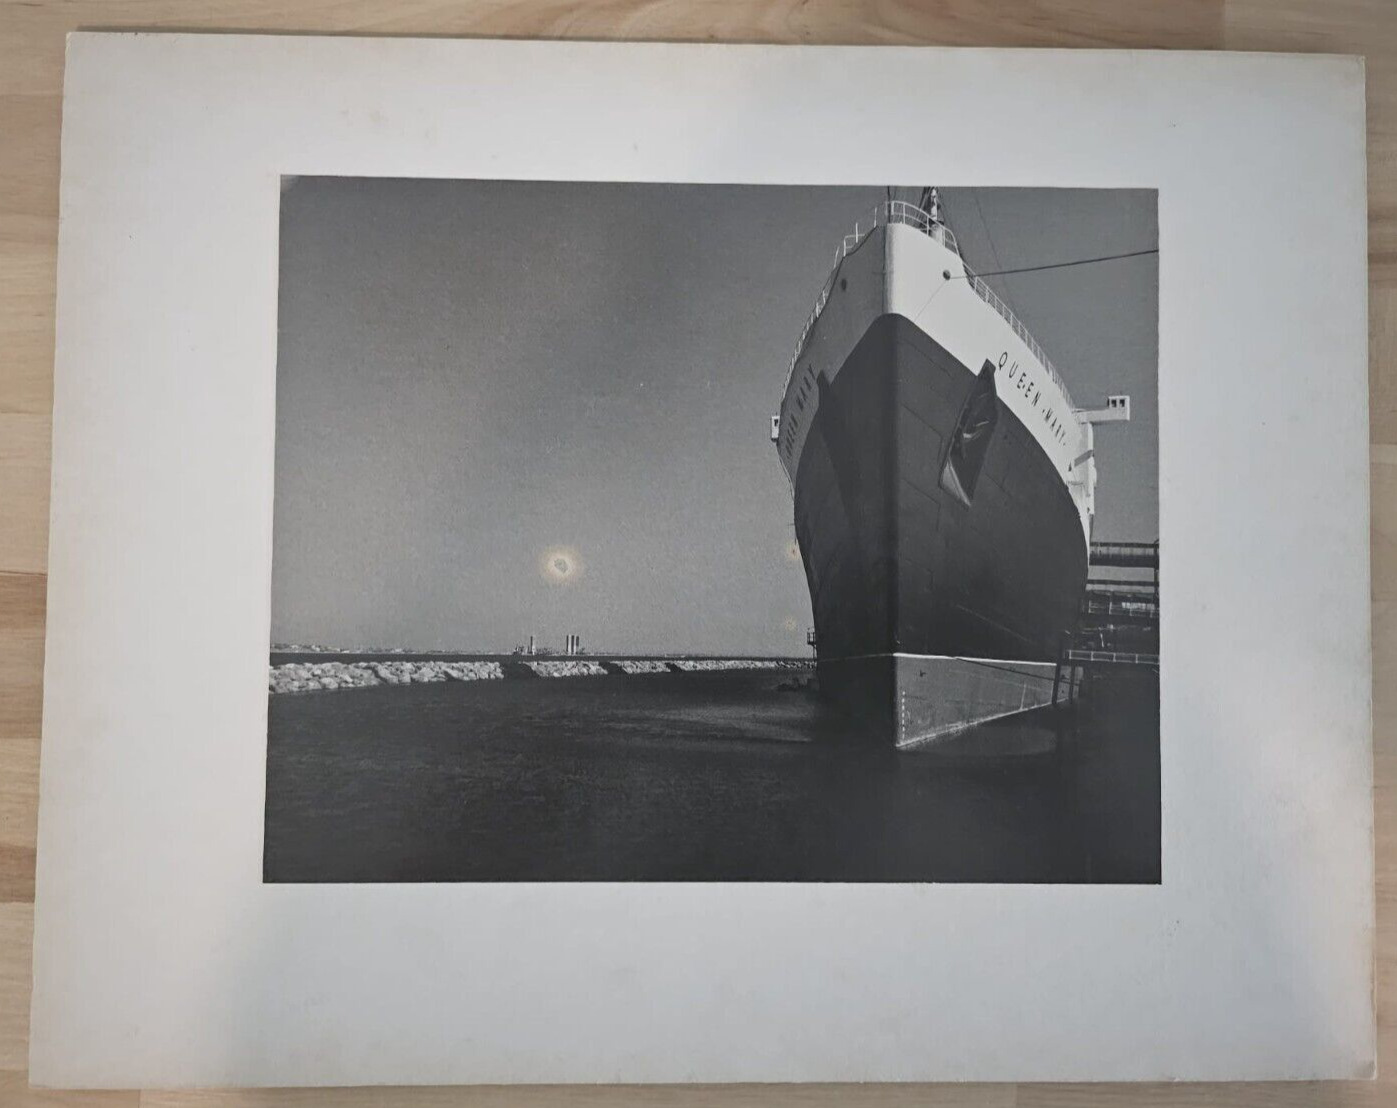 DOCKED HUGE QUEEN MARY CRUISE SHIP PHOTOGRAPHY BILL ORENSTEIN 1970s Photo Y 418